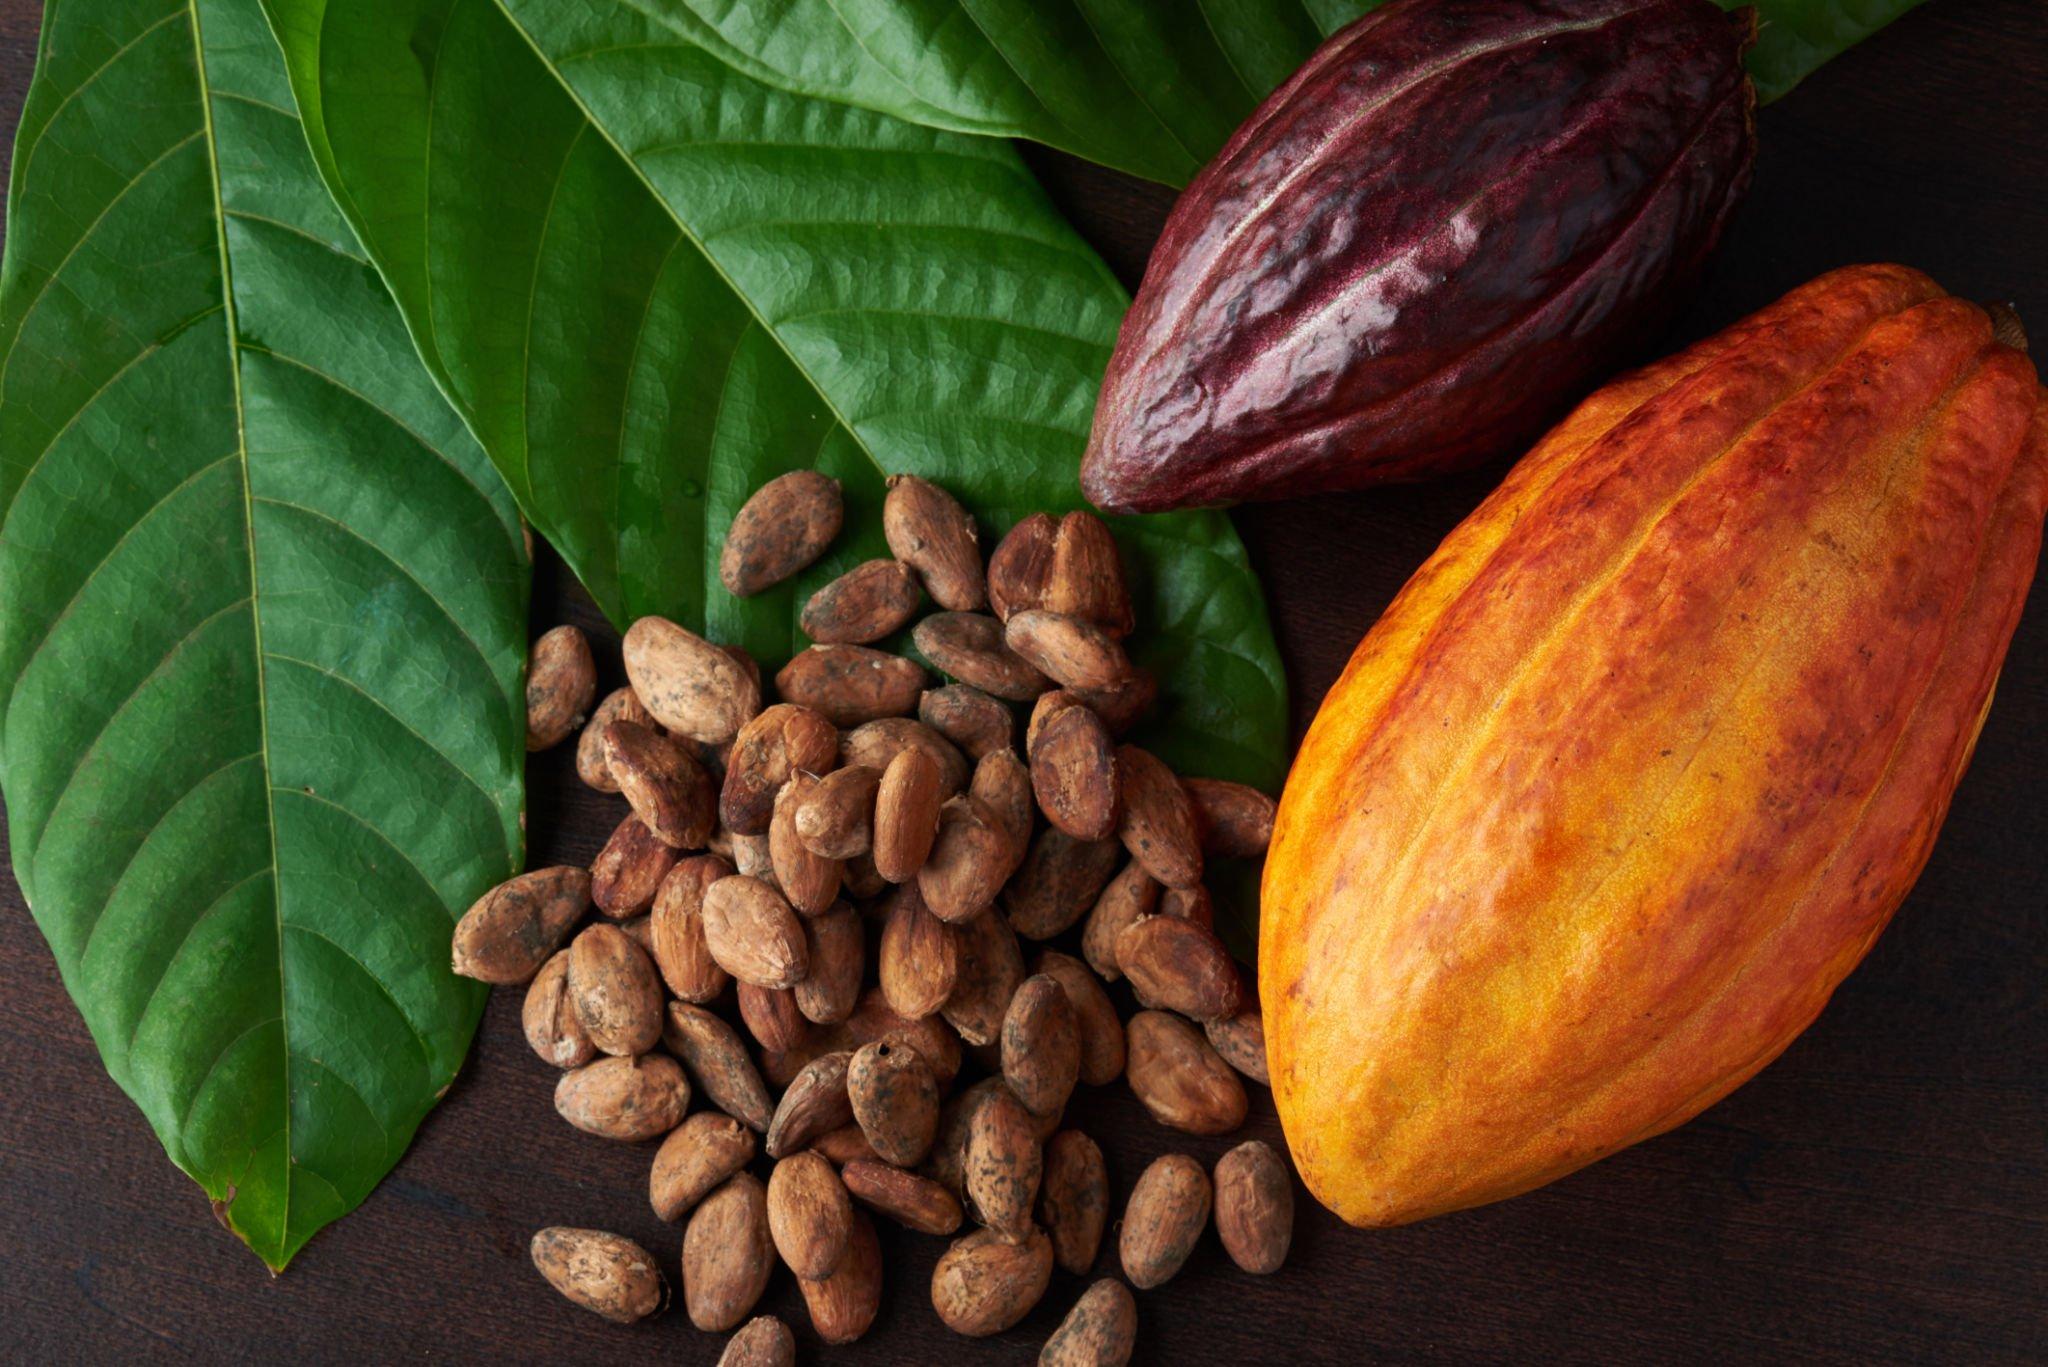 One of the World’s Finest Cacao Producers